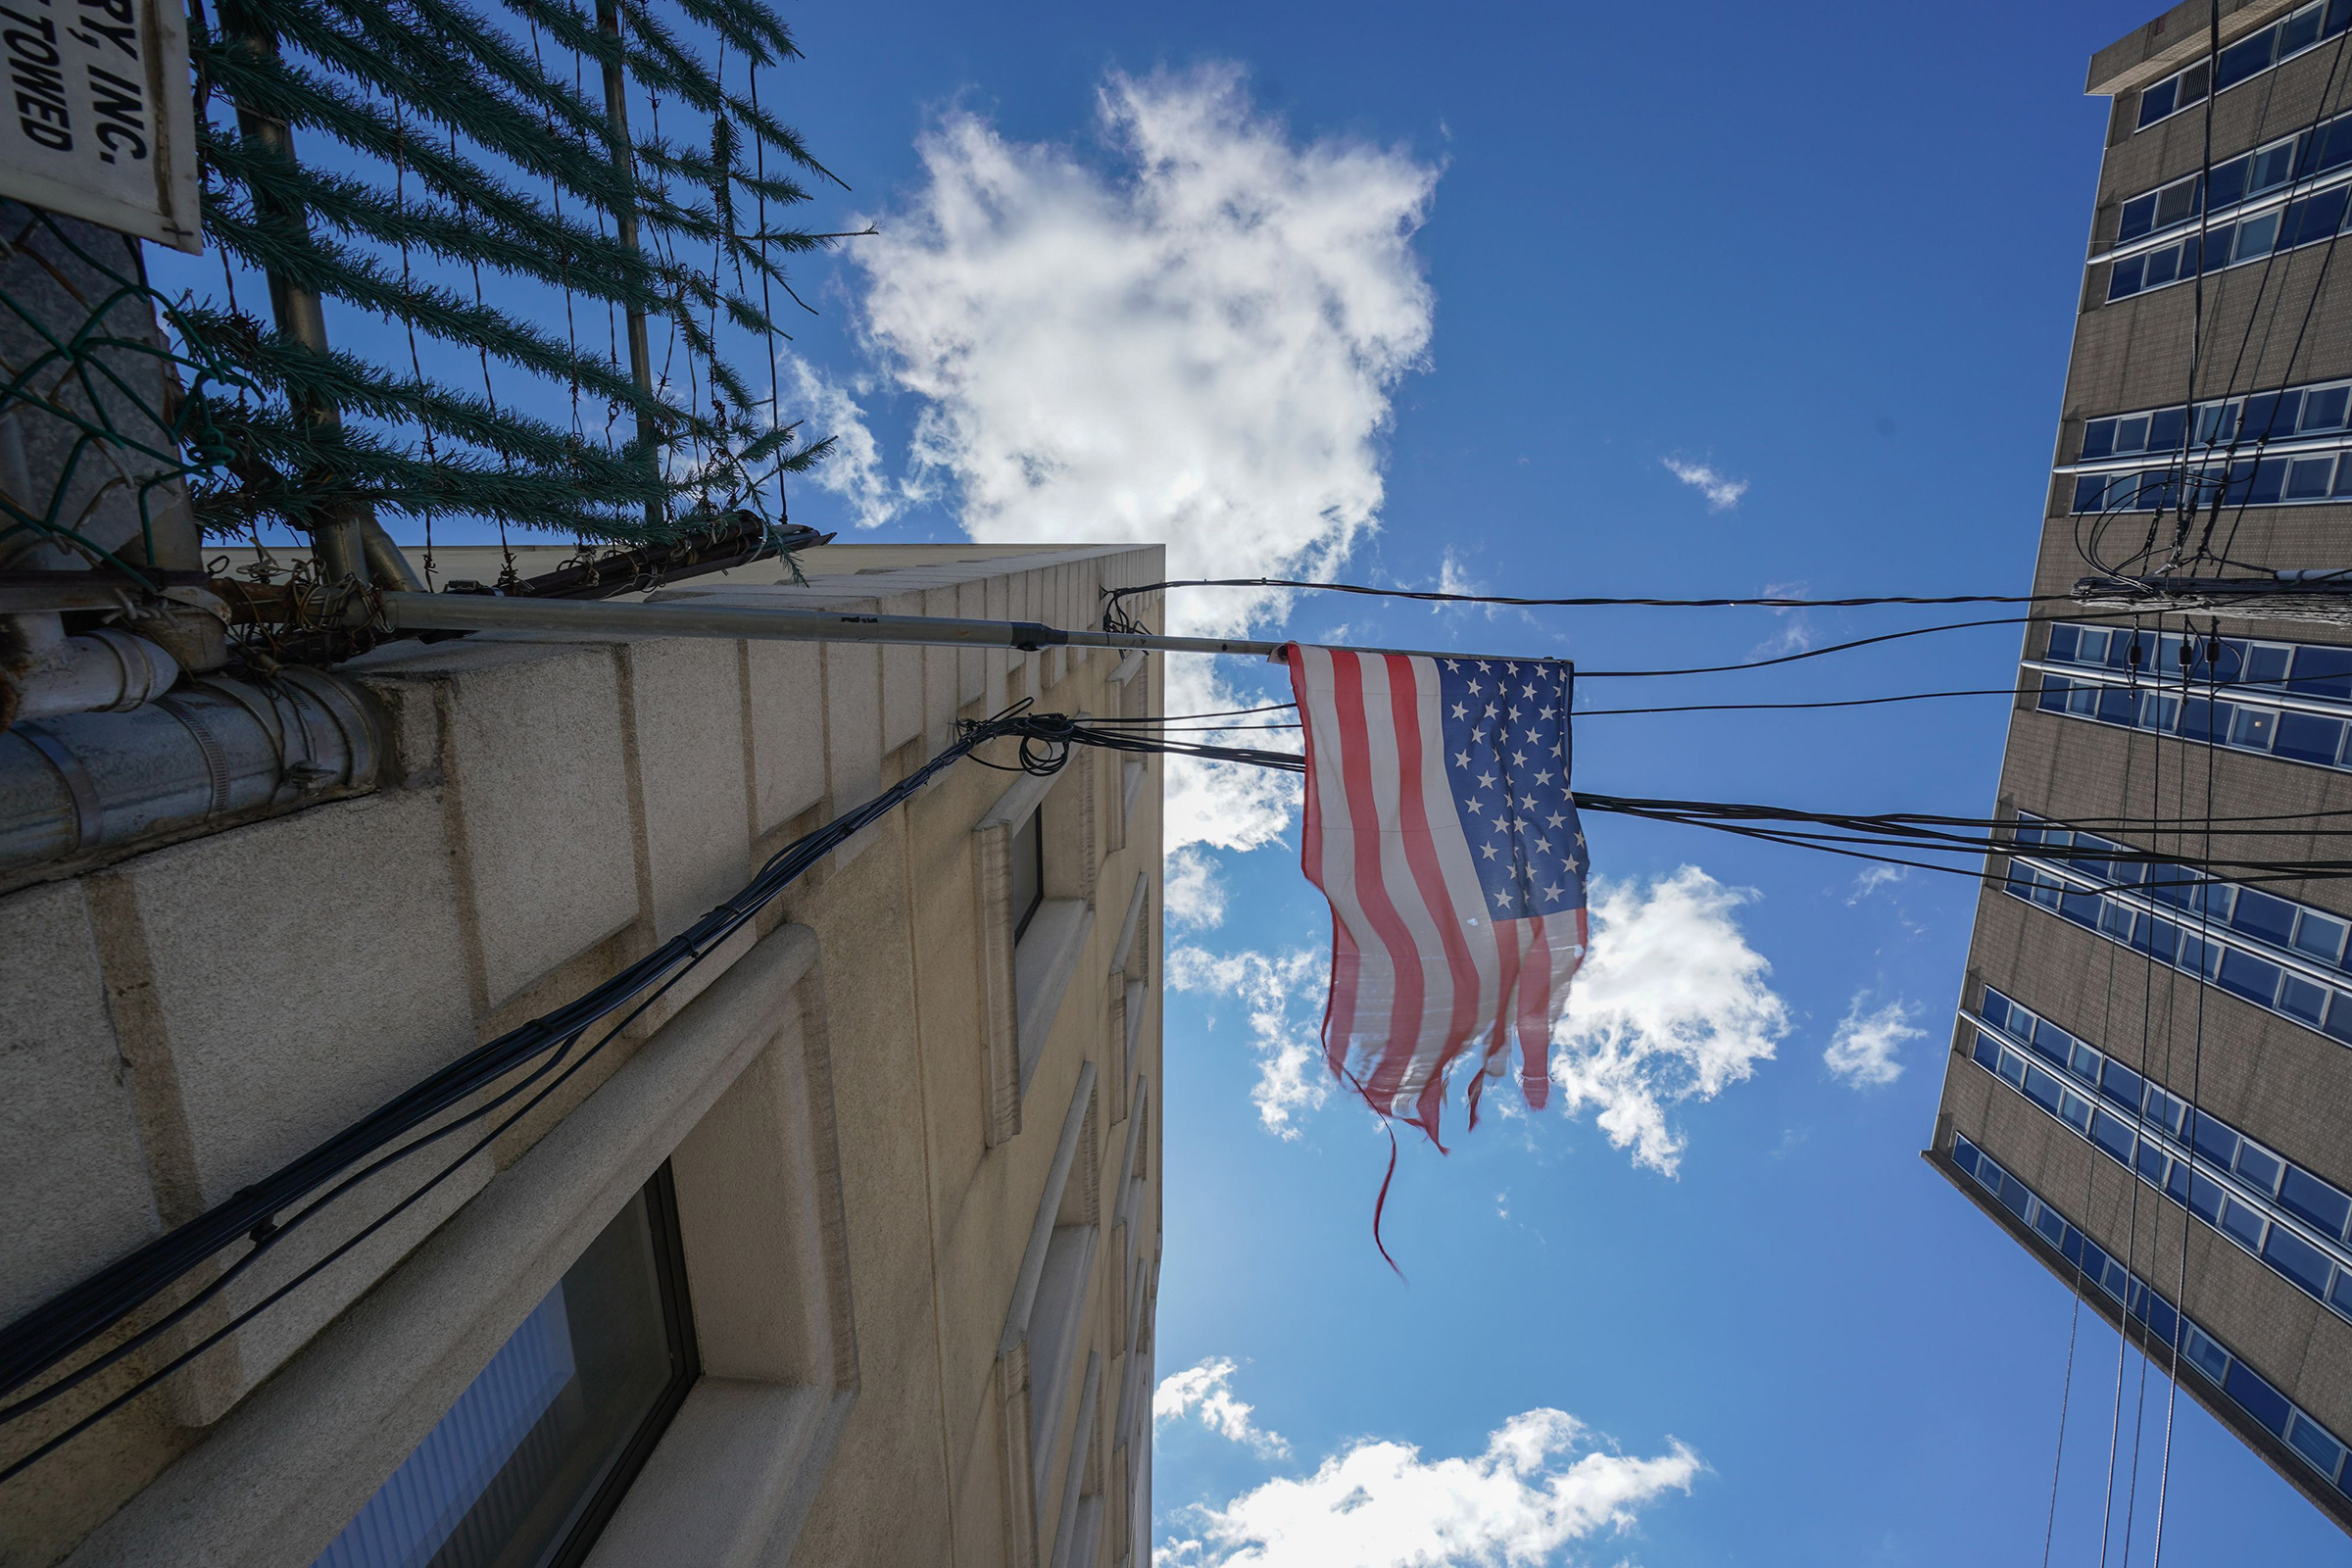 A tattered American flag hangs from a fence across the street from Wyckoff Hospital in Brooklyn, N.Y. on April 4, 2020. (Bryan R. Smith—AFP/Getty Images)